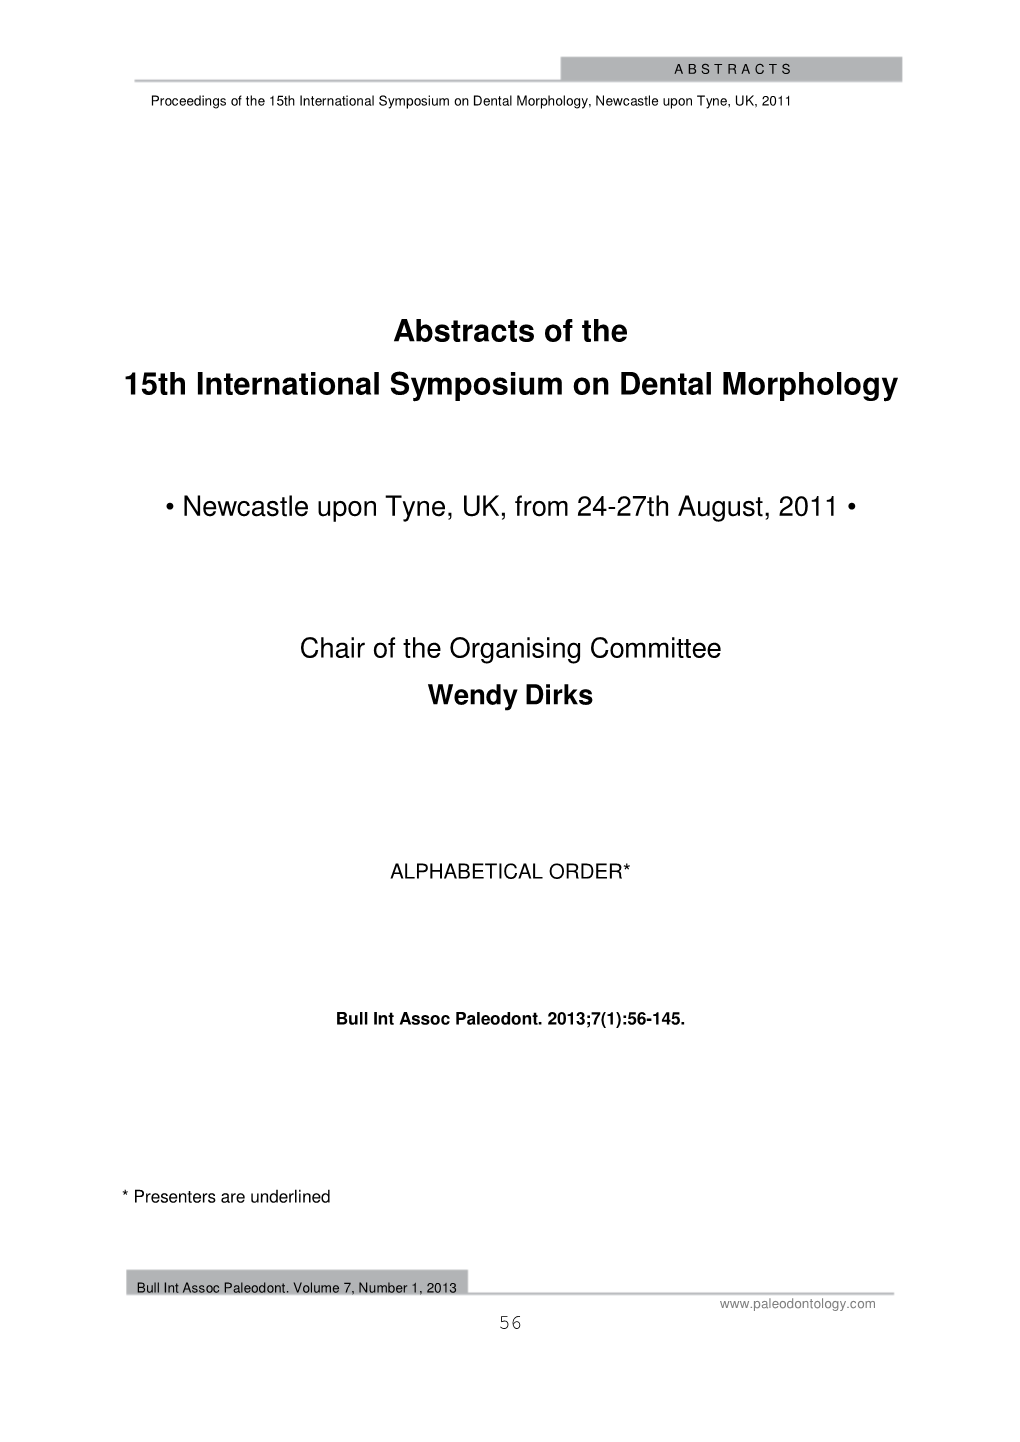 Abstracts of the 15Th International Symposium on Dental Morphology